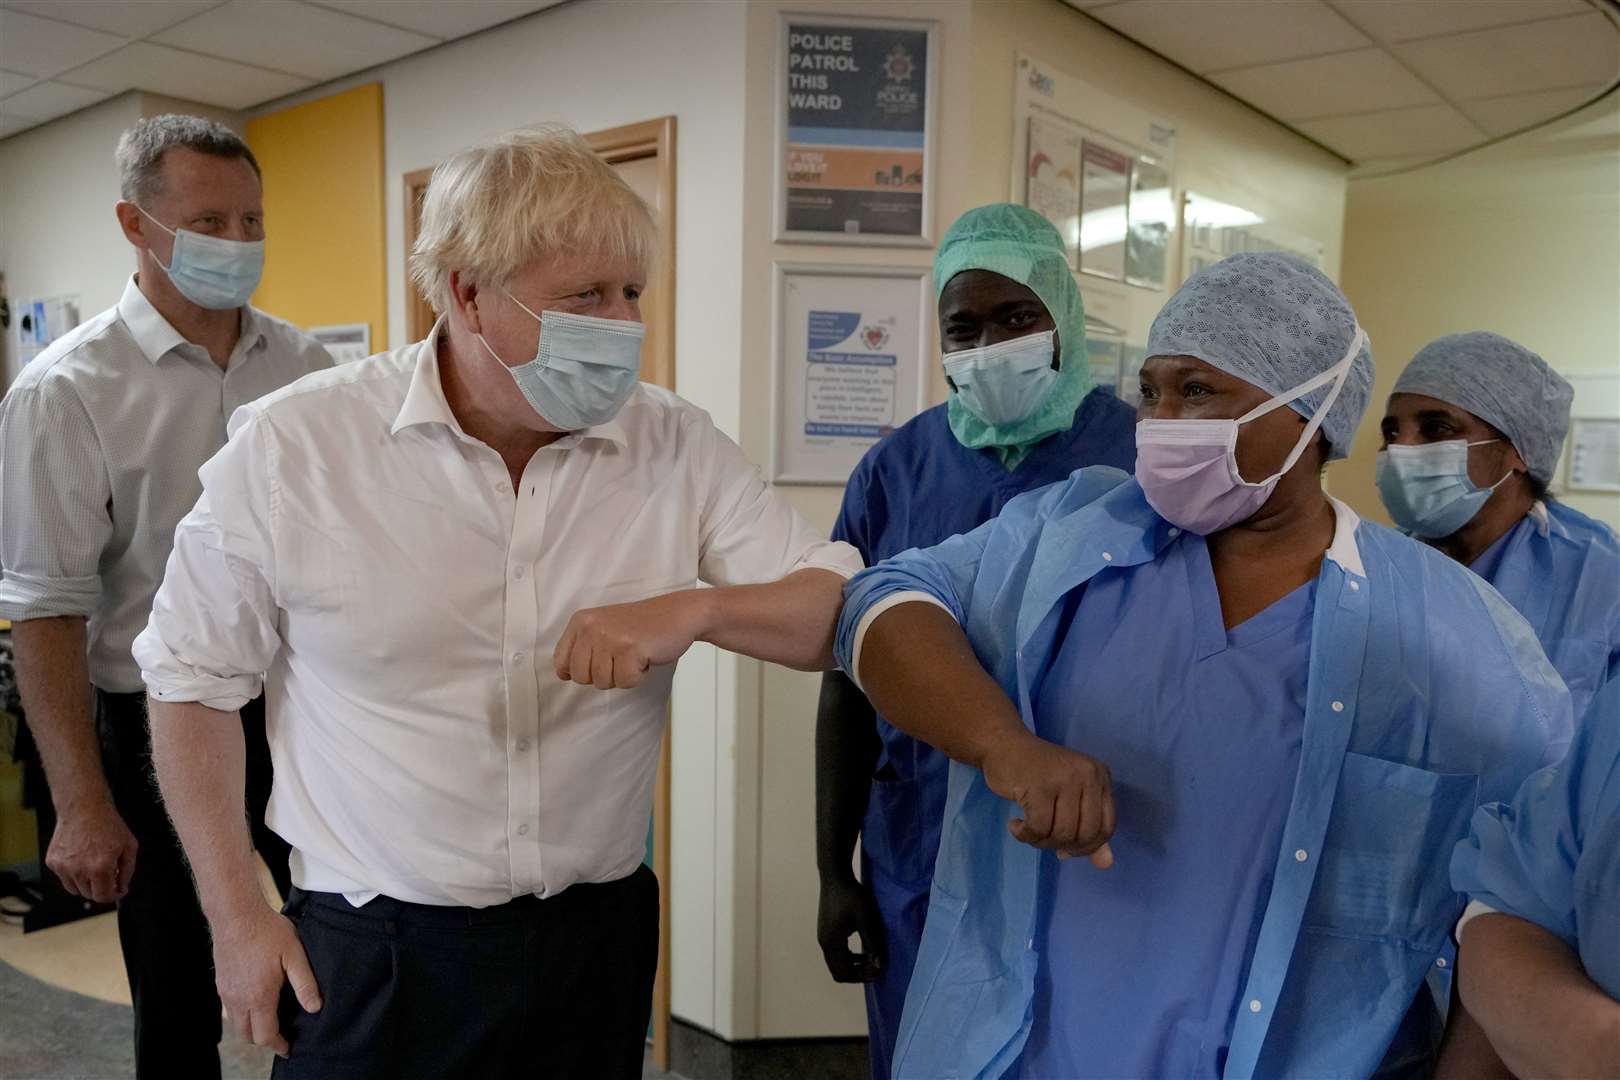 Prime Minister Boris Johnson meets members of staff during a visit to the South West London Elective Orthopaedic Centre in Epsom, Surrey (Kirsty Wigglesworth/PA)